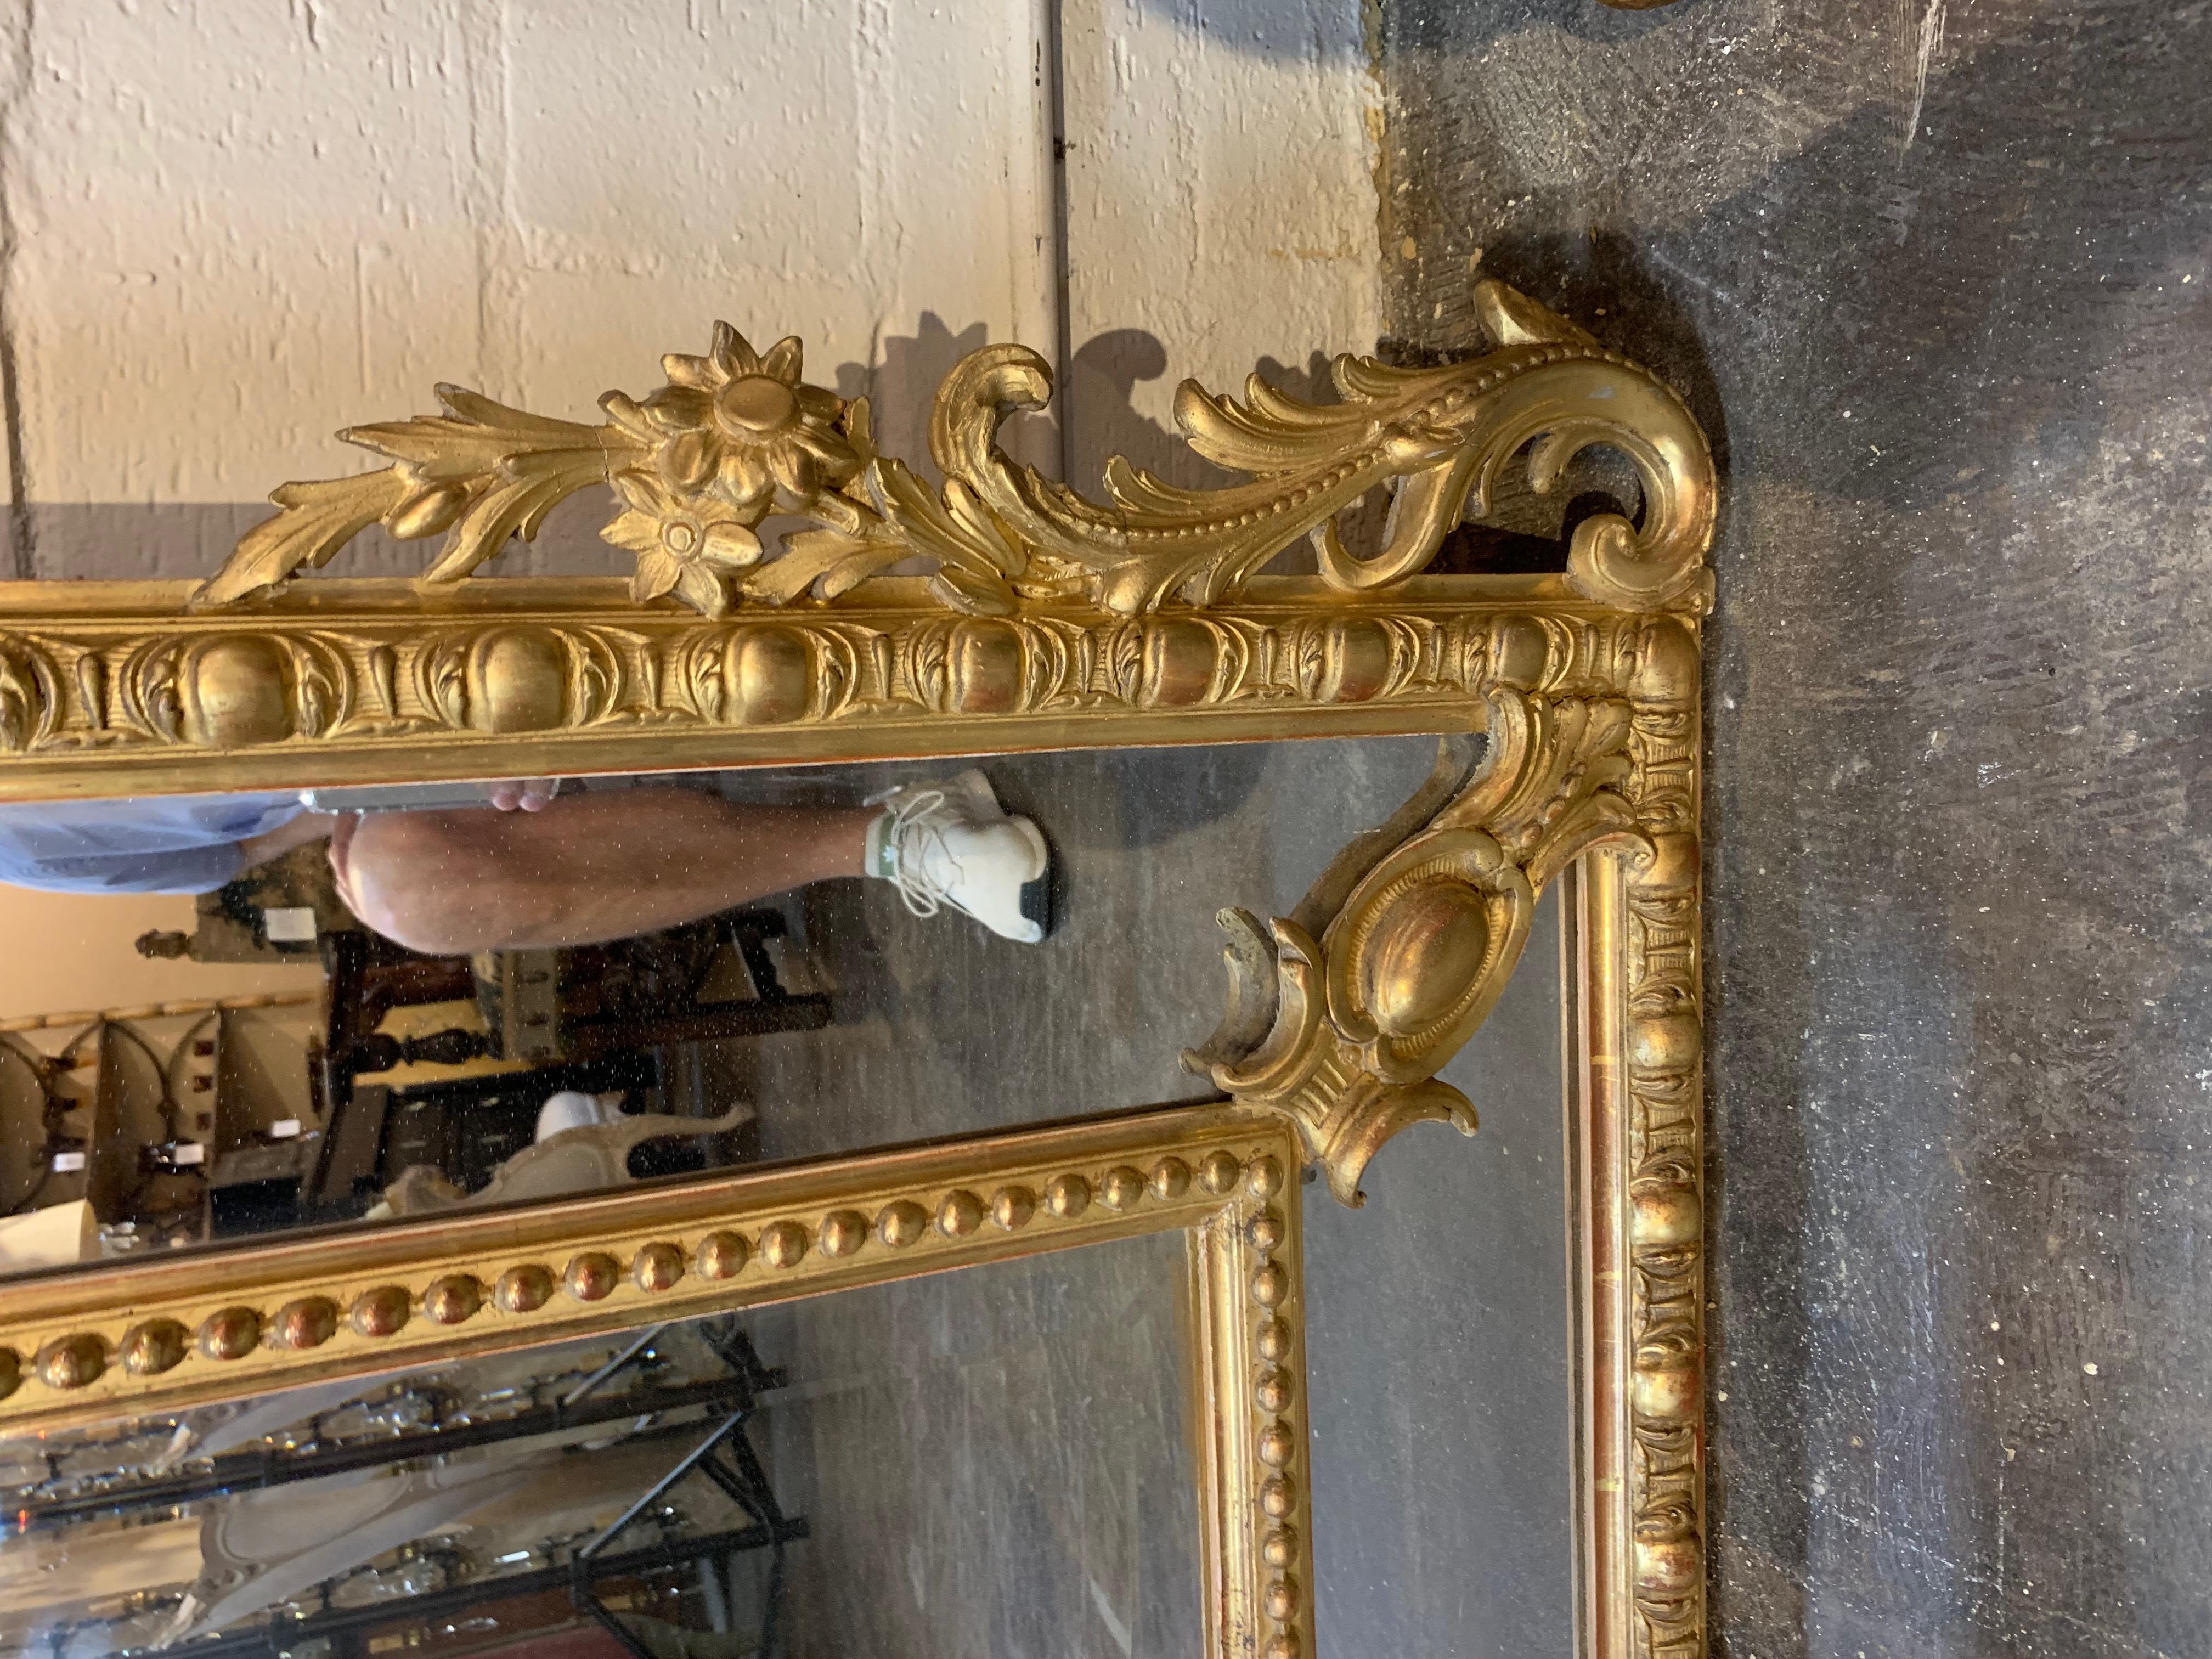 Stunning 19th century French Louis XVI style gold gilded cushion mirror. Lovely gilding with images of flowers, scrolls, leaves and birds. The mirror has original beveled mercury glass.
Makes an impressive statement in a fine home.